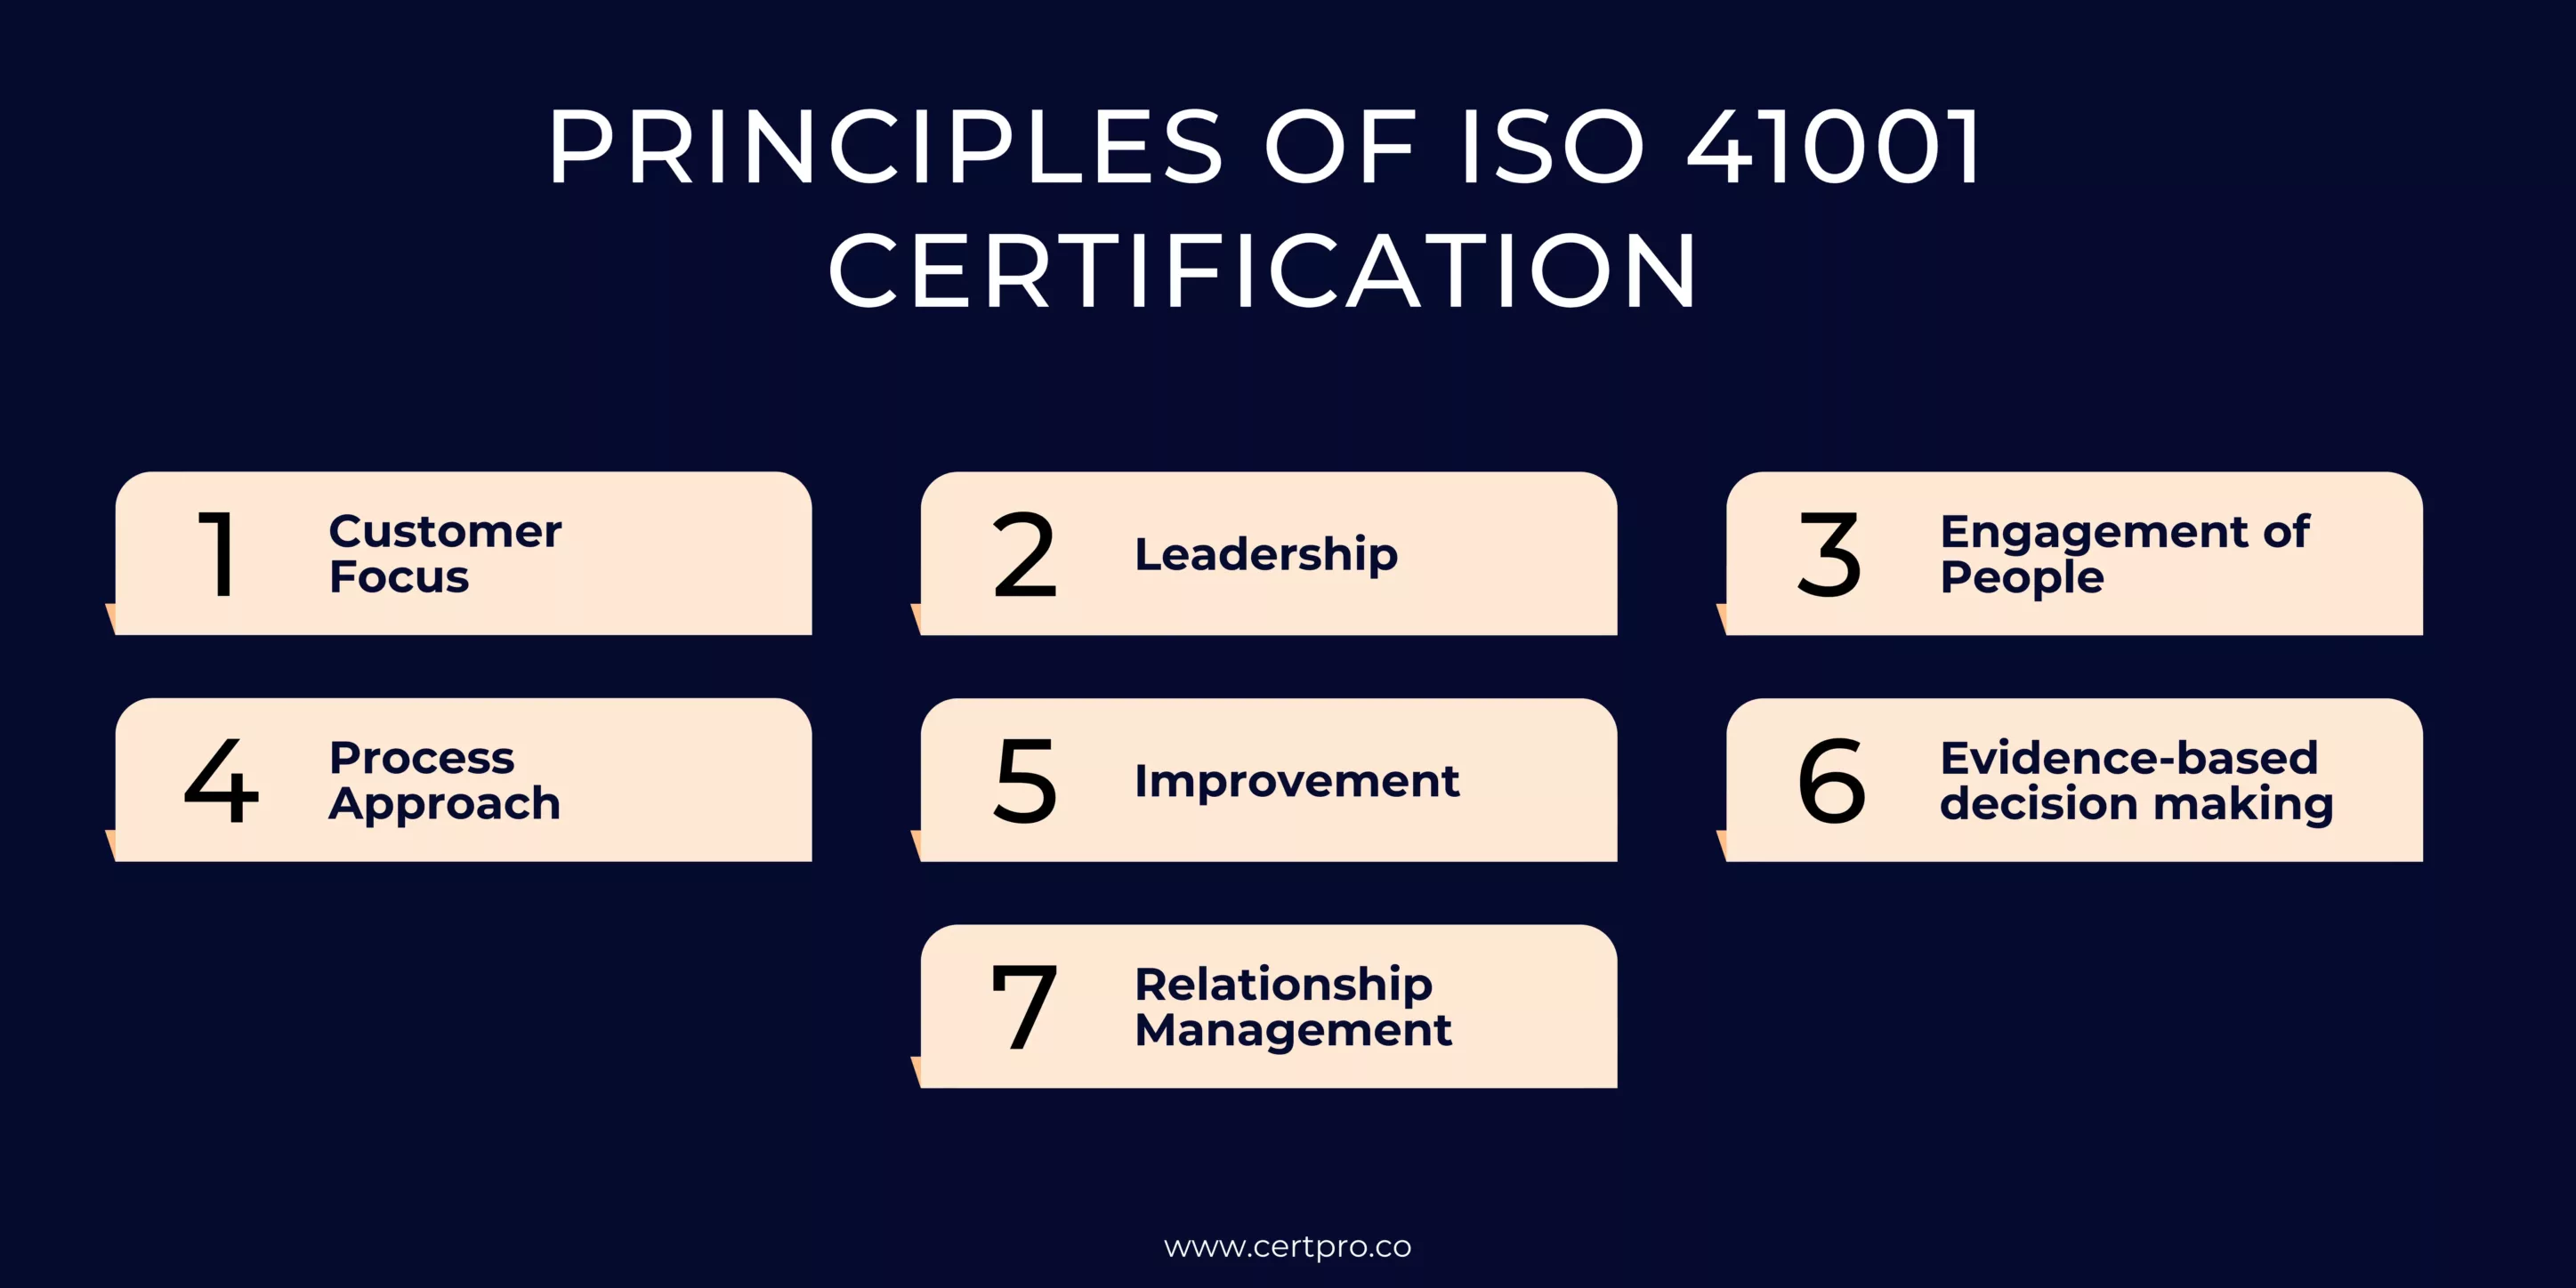 PRINCIPLES OF ISO 41001